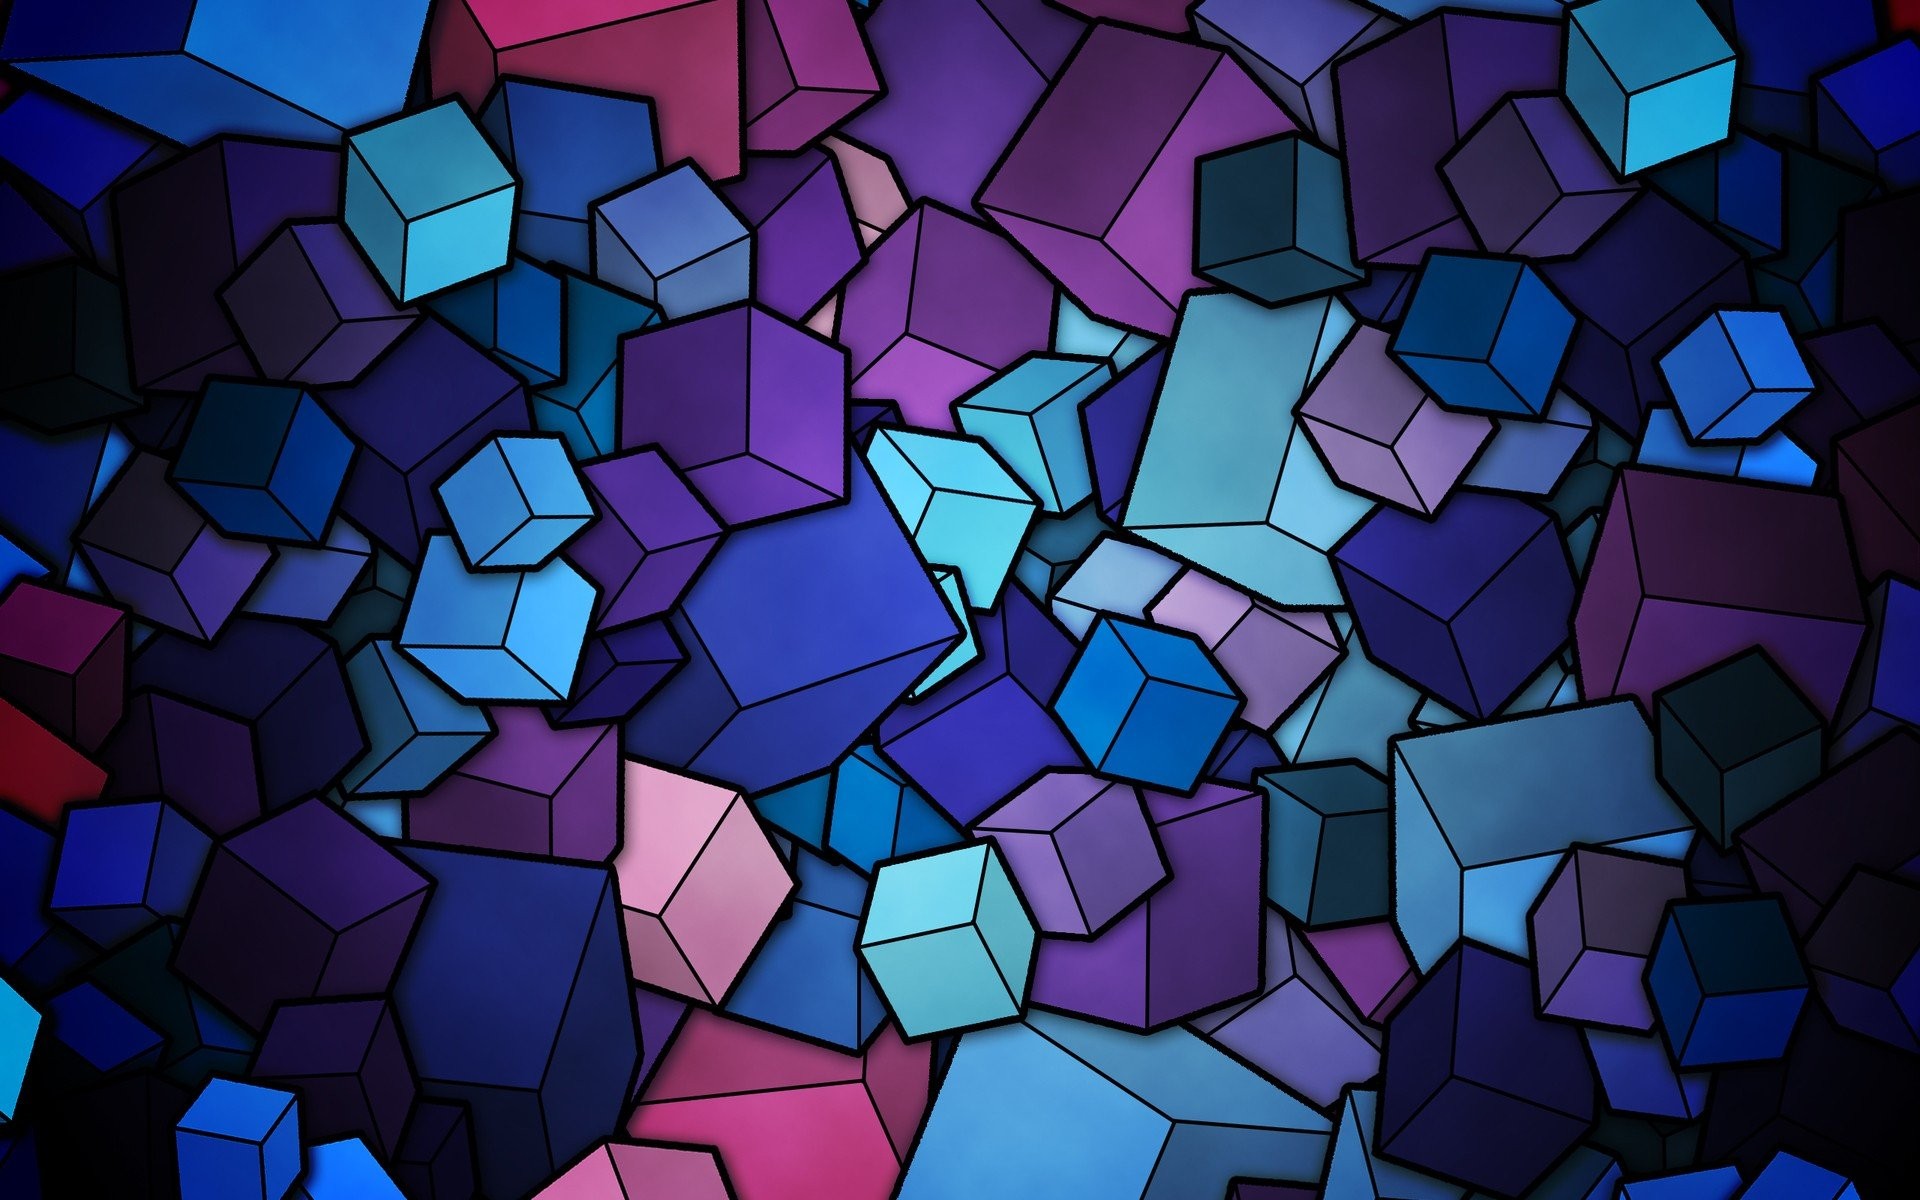 Abstract Cubes Art Multicolor Widescreen Imagescool Images